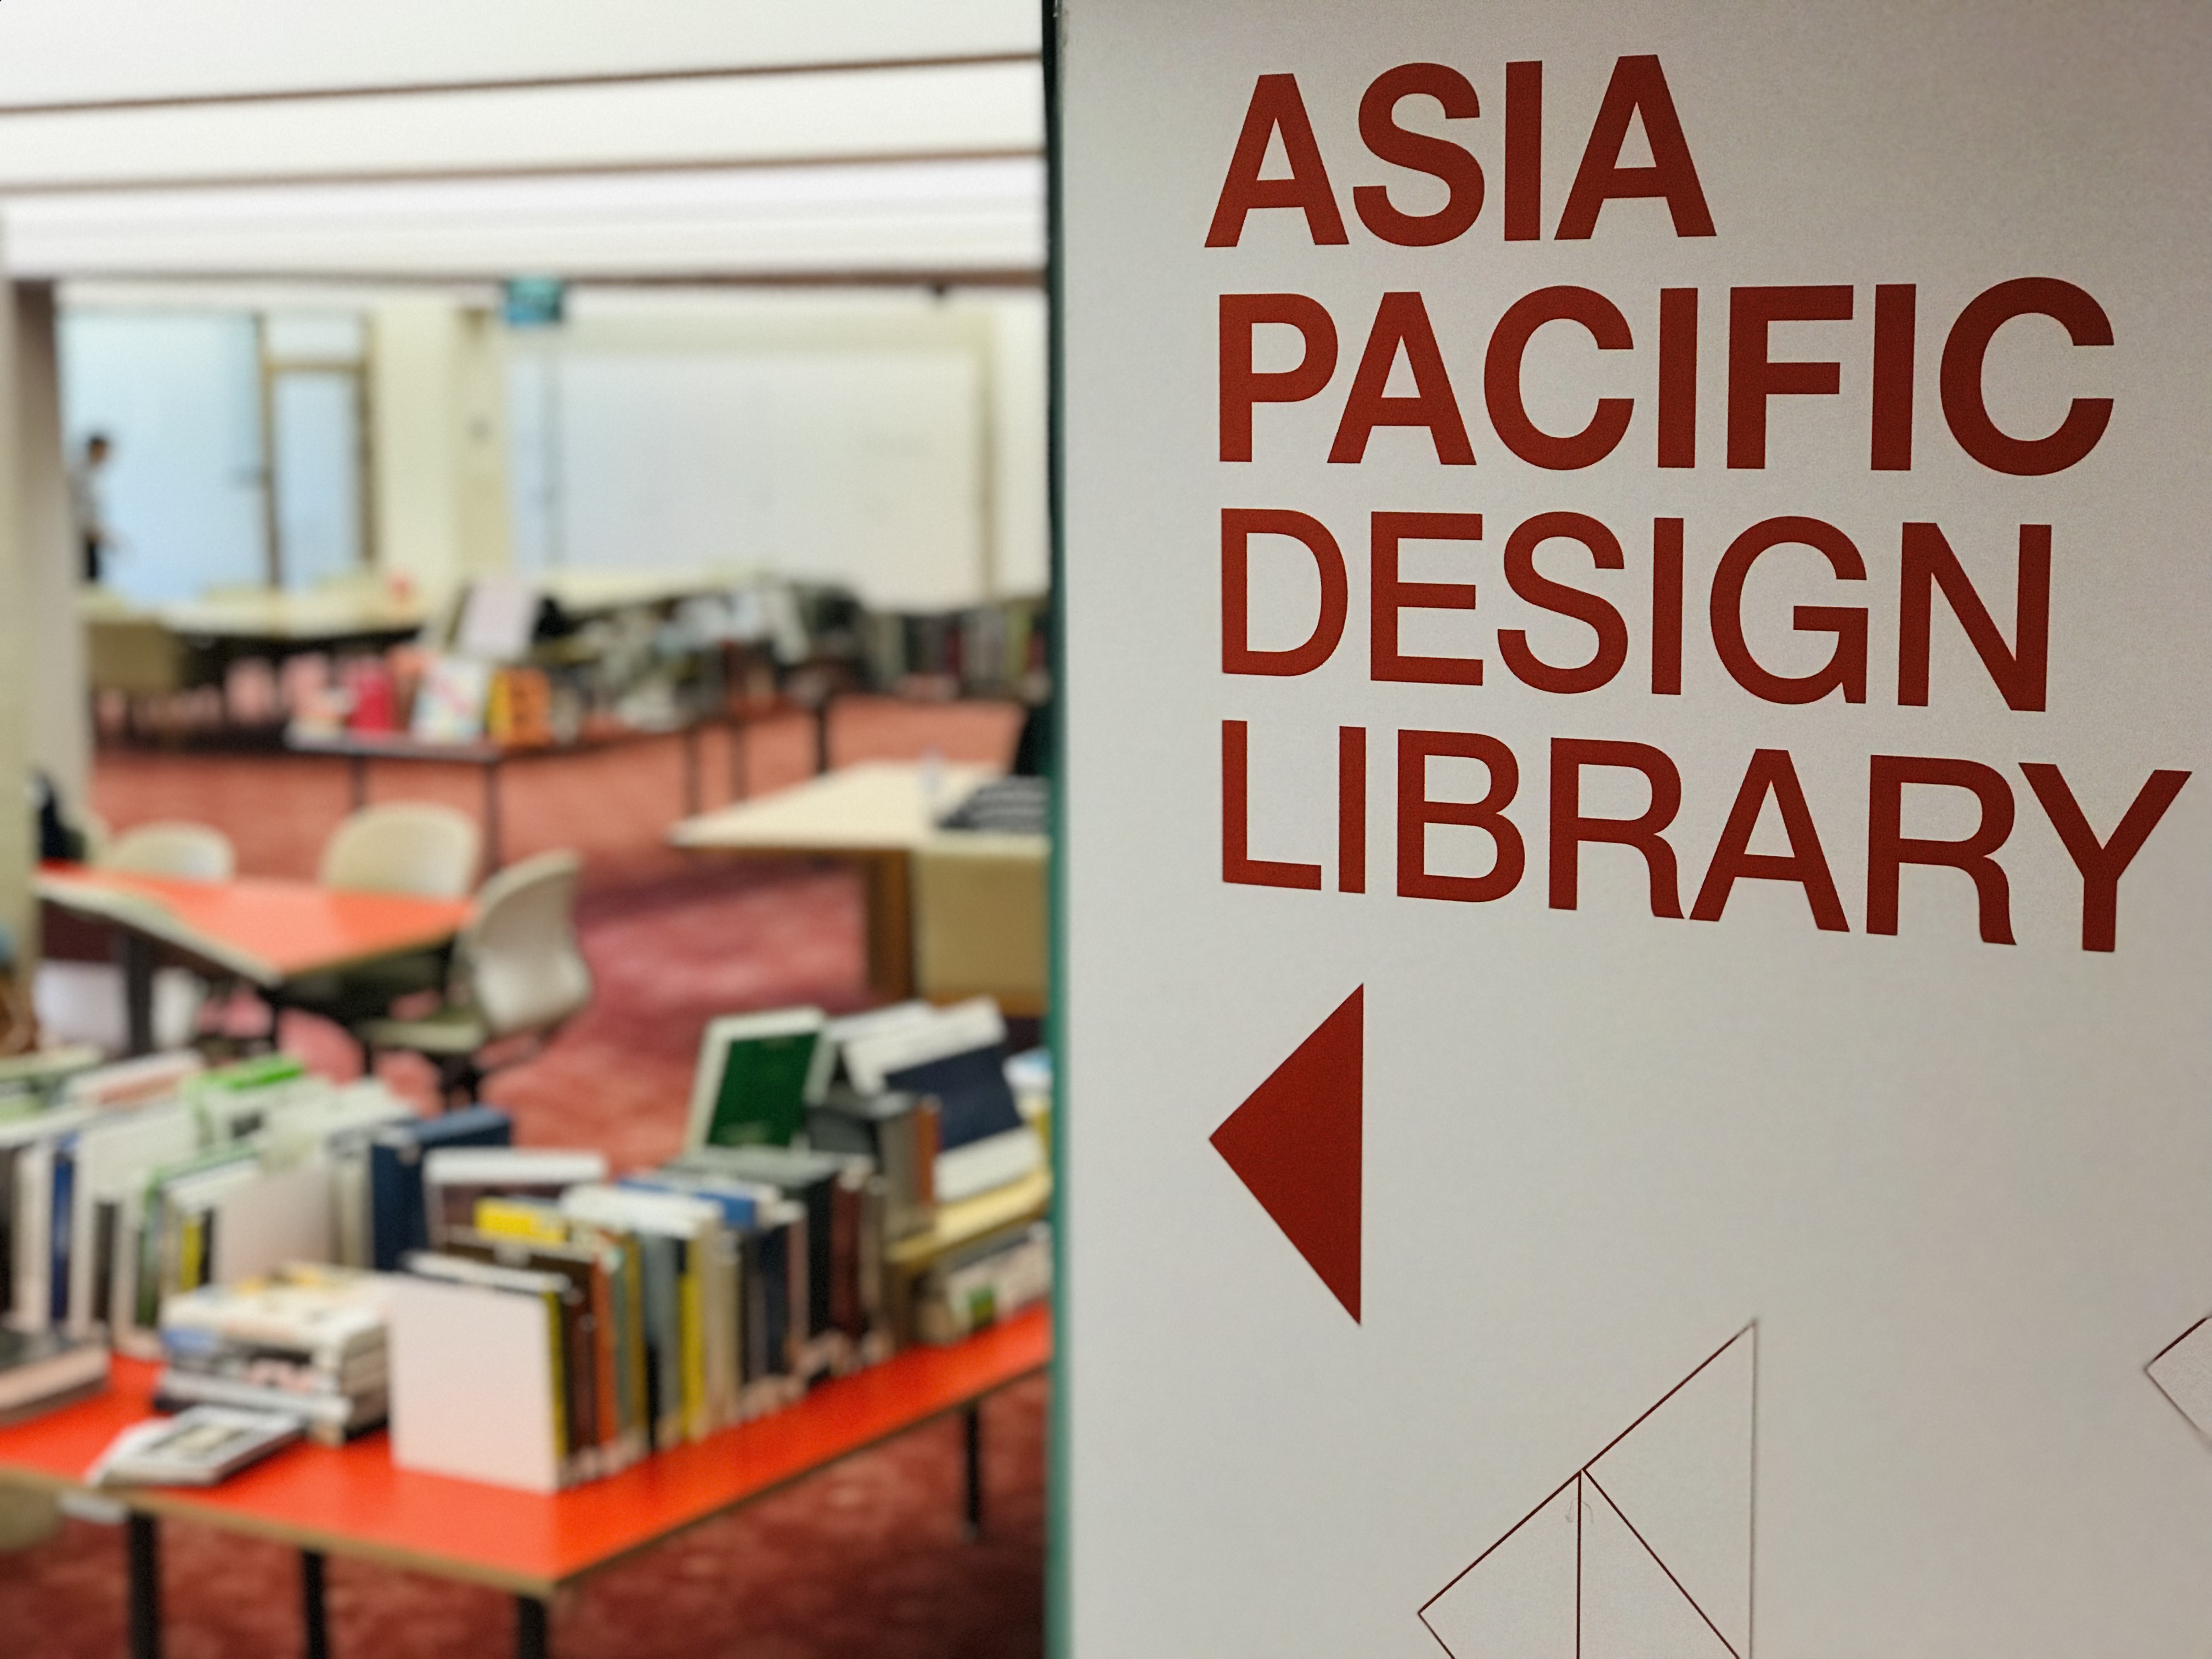 Asia pacific design library sign